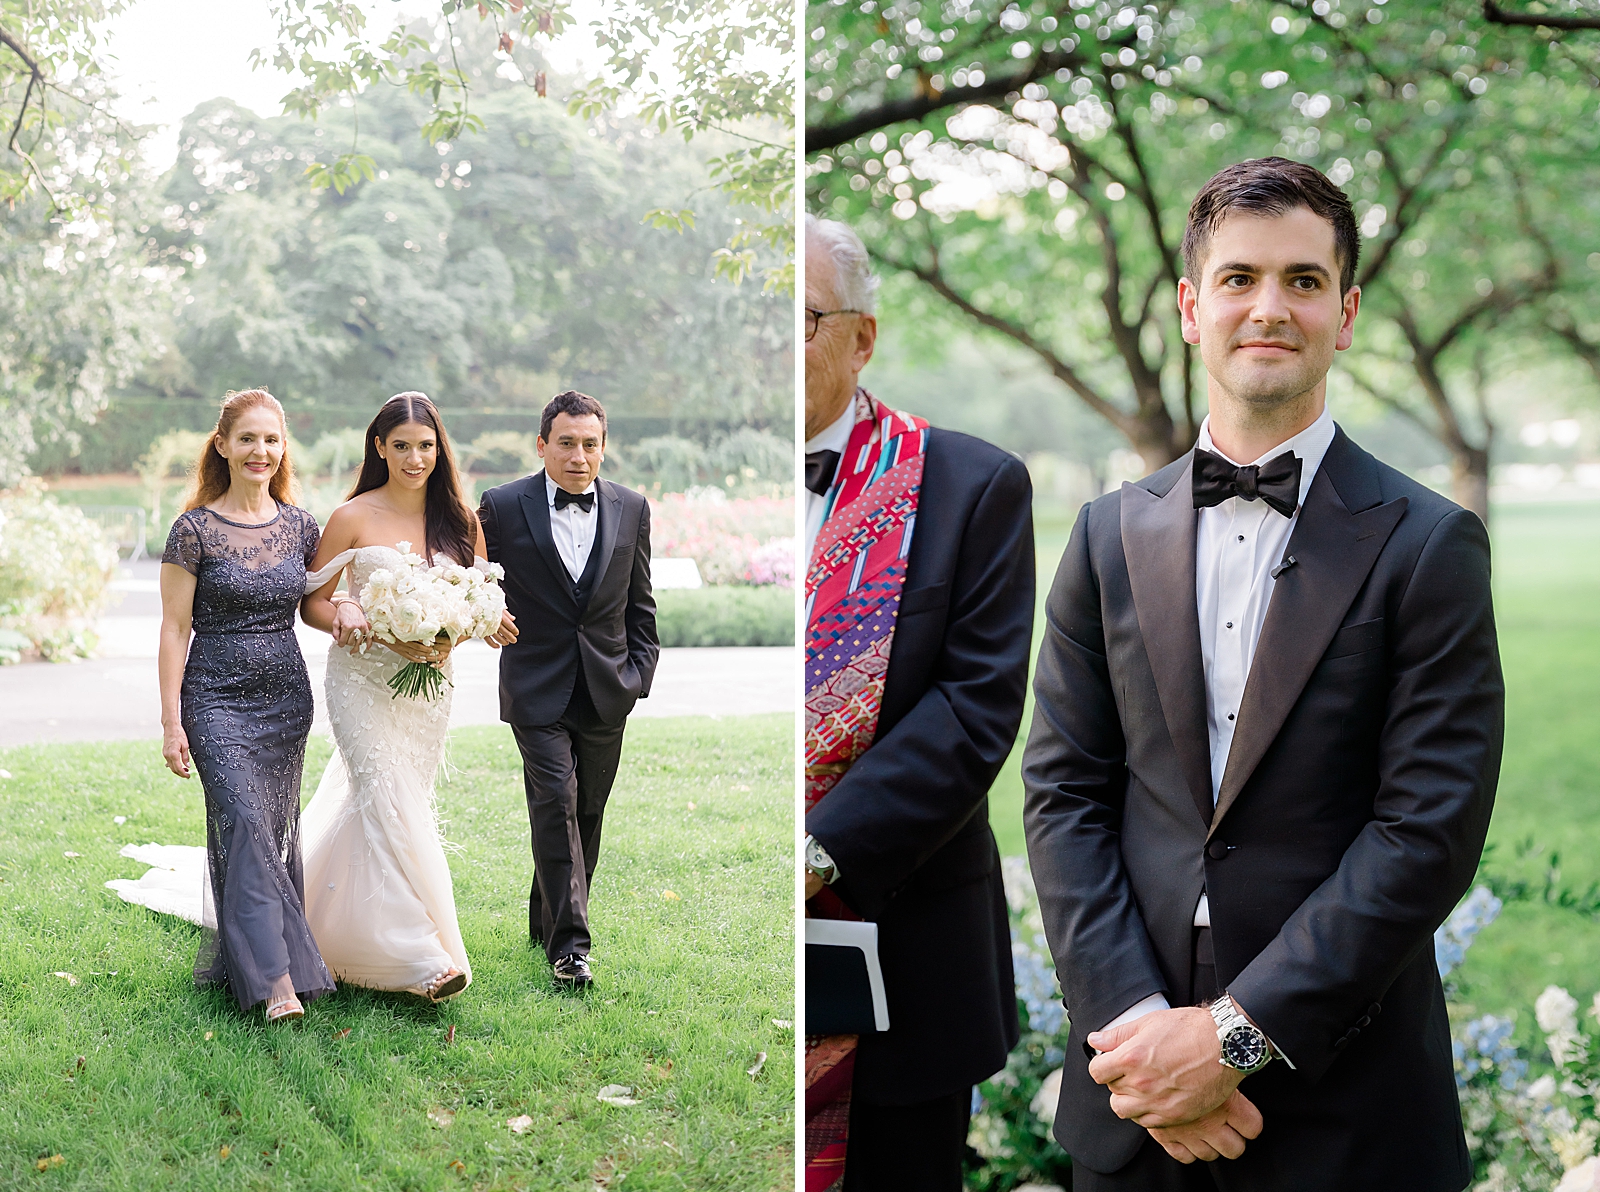 Left photo: The bride and her parents as they walk down the aisle.
Right photo: Shot of the groom watching his bride walk down the aisle.